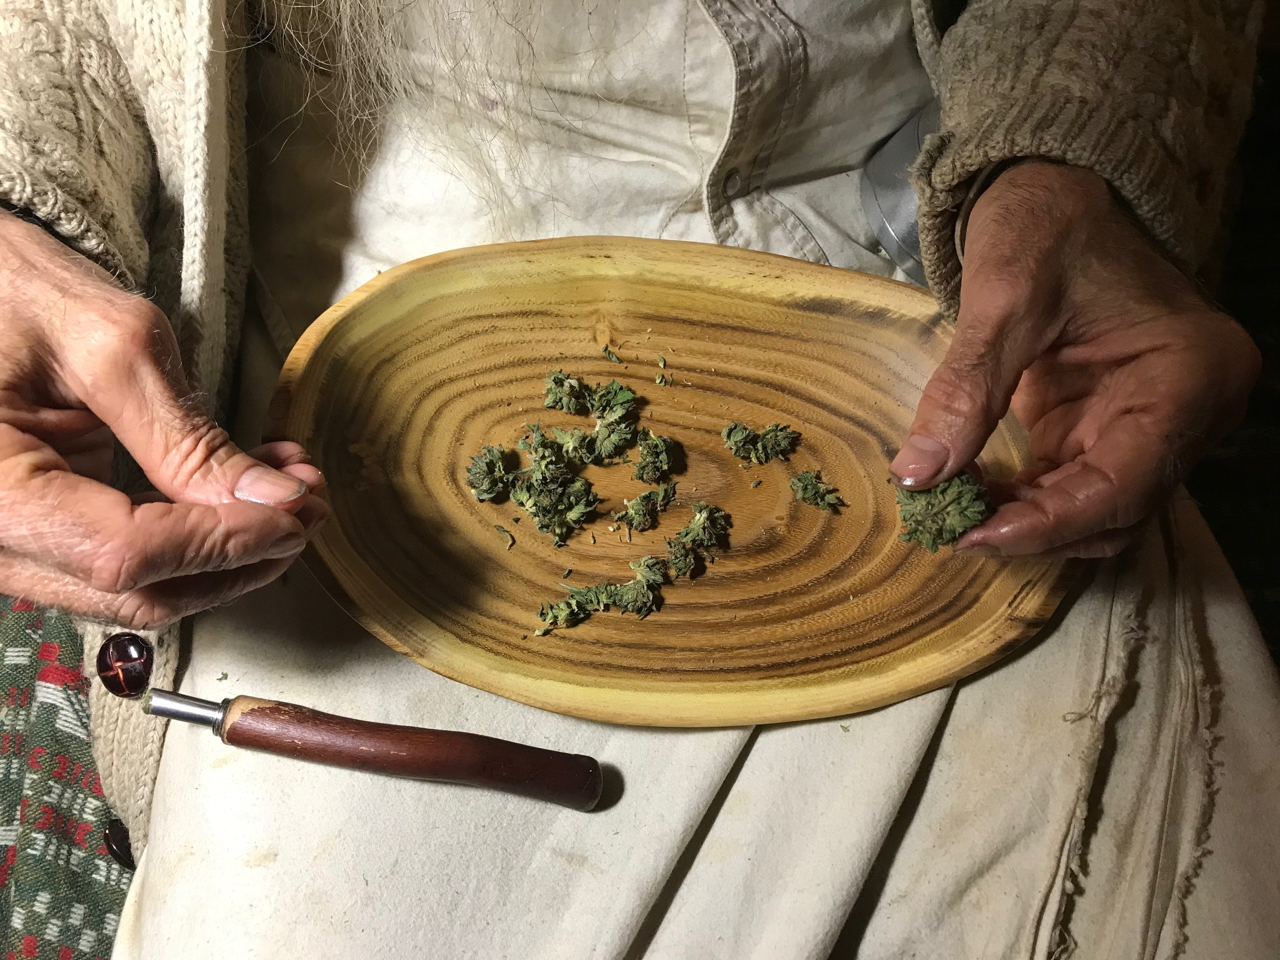 Swami new rolling tray from David Morgenstein